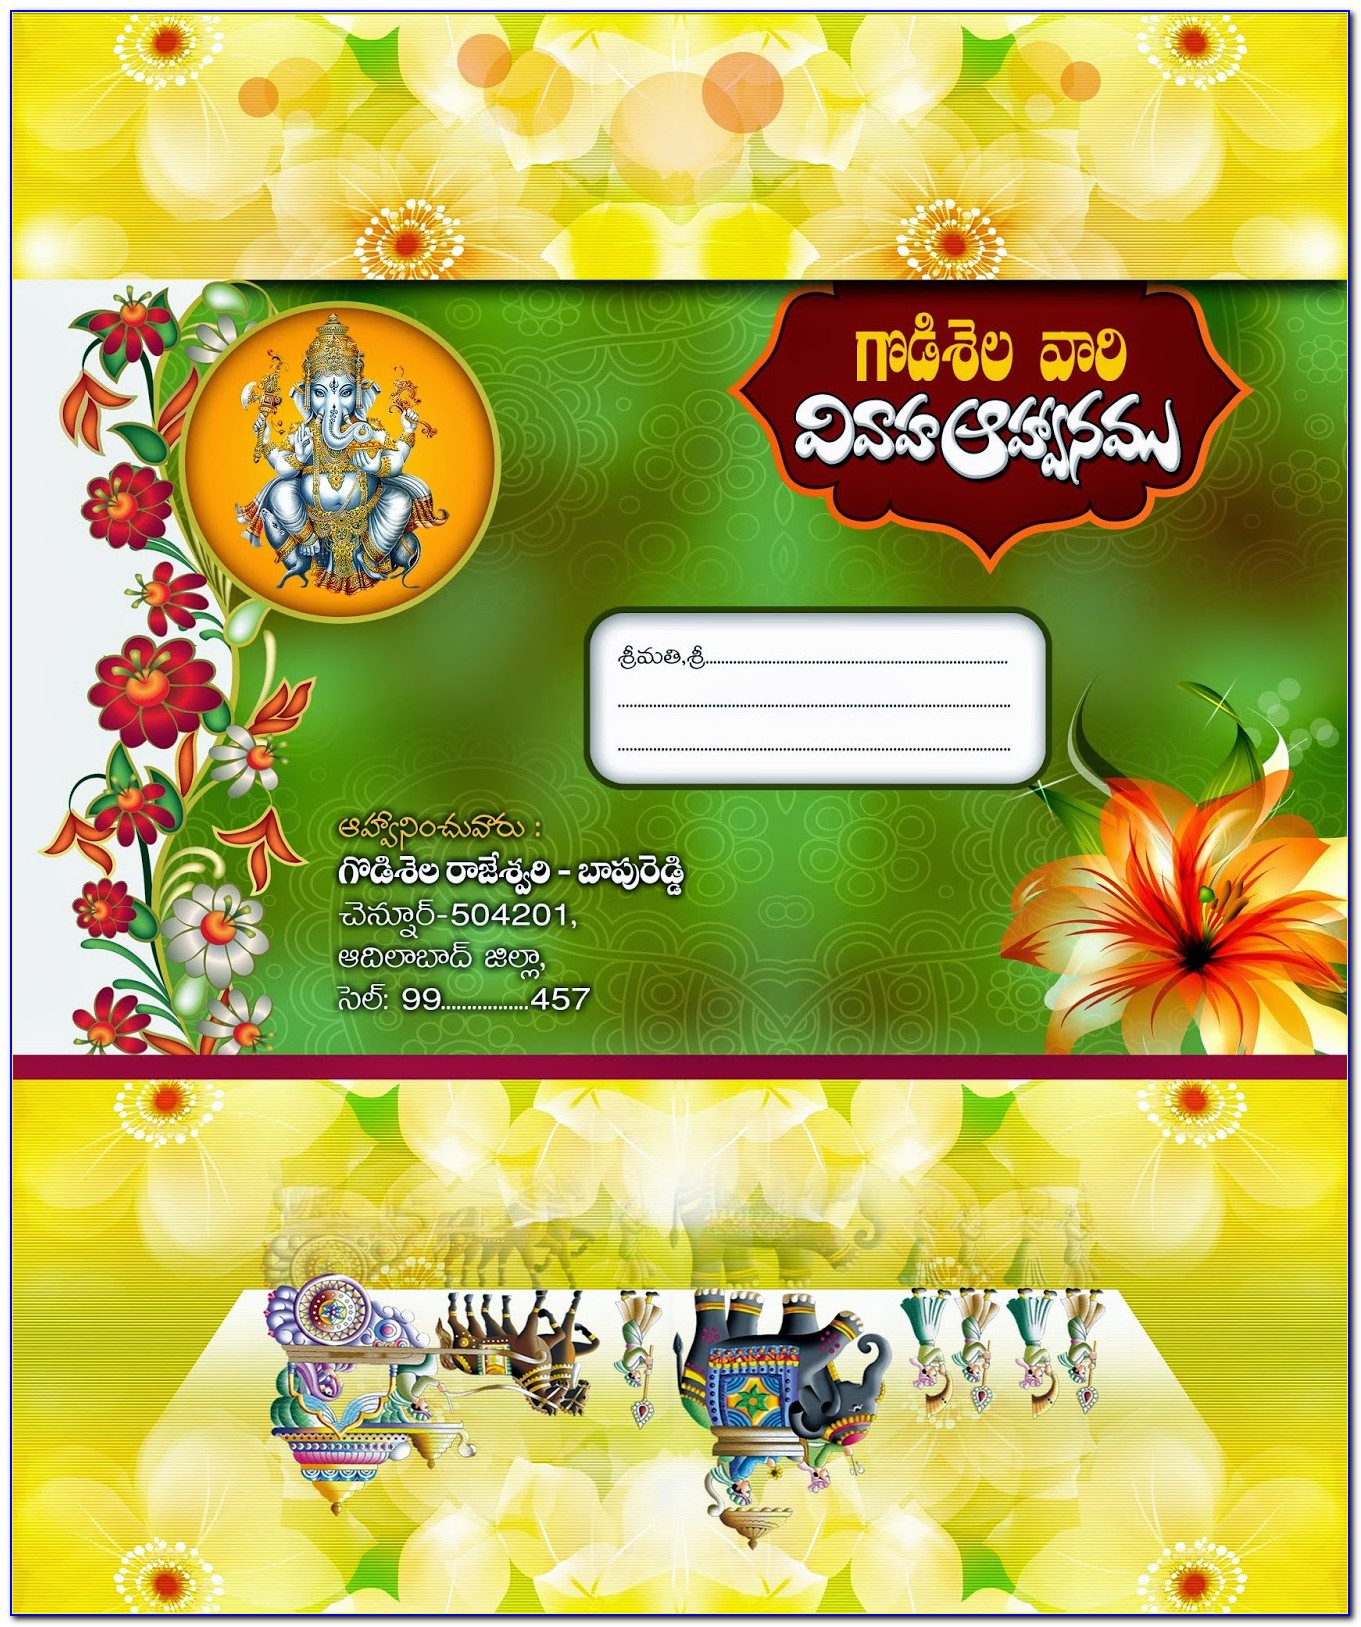 Invitation Card Template Free Download Word